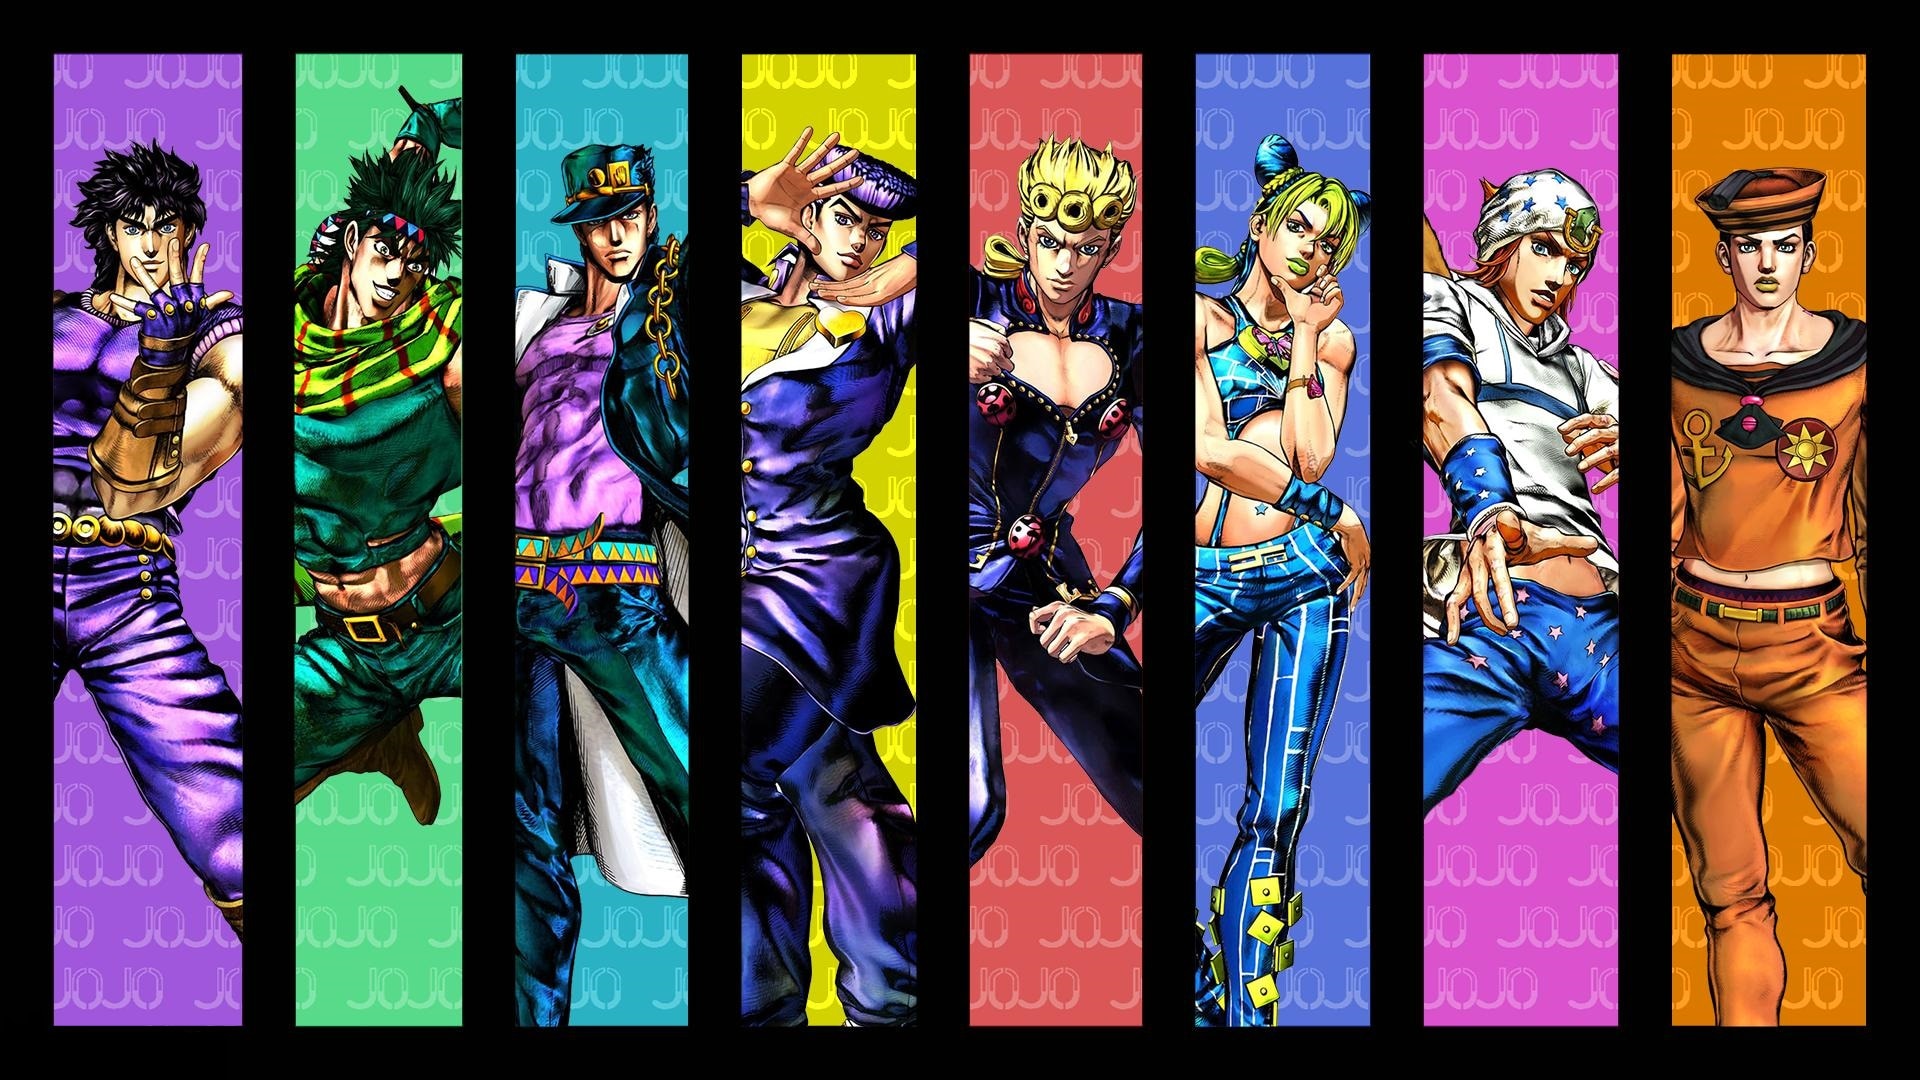 Comparing the 3D models and poses in Part 1-3 JoJo OPs and All